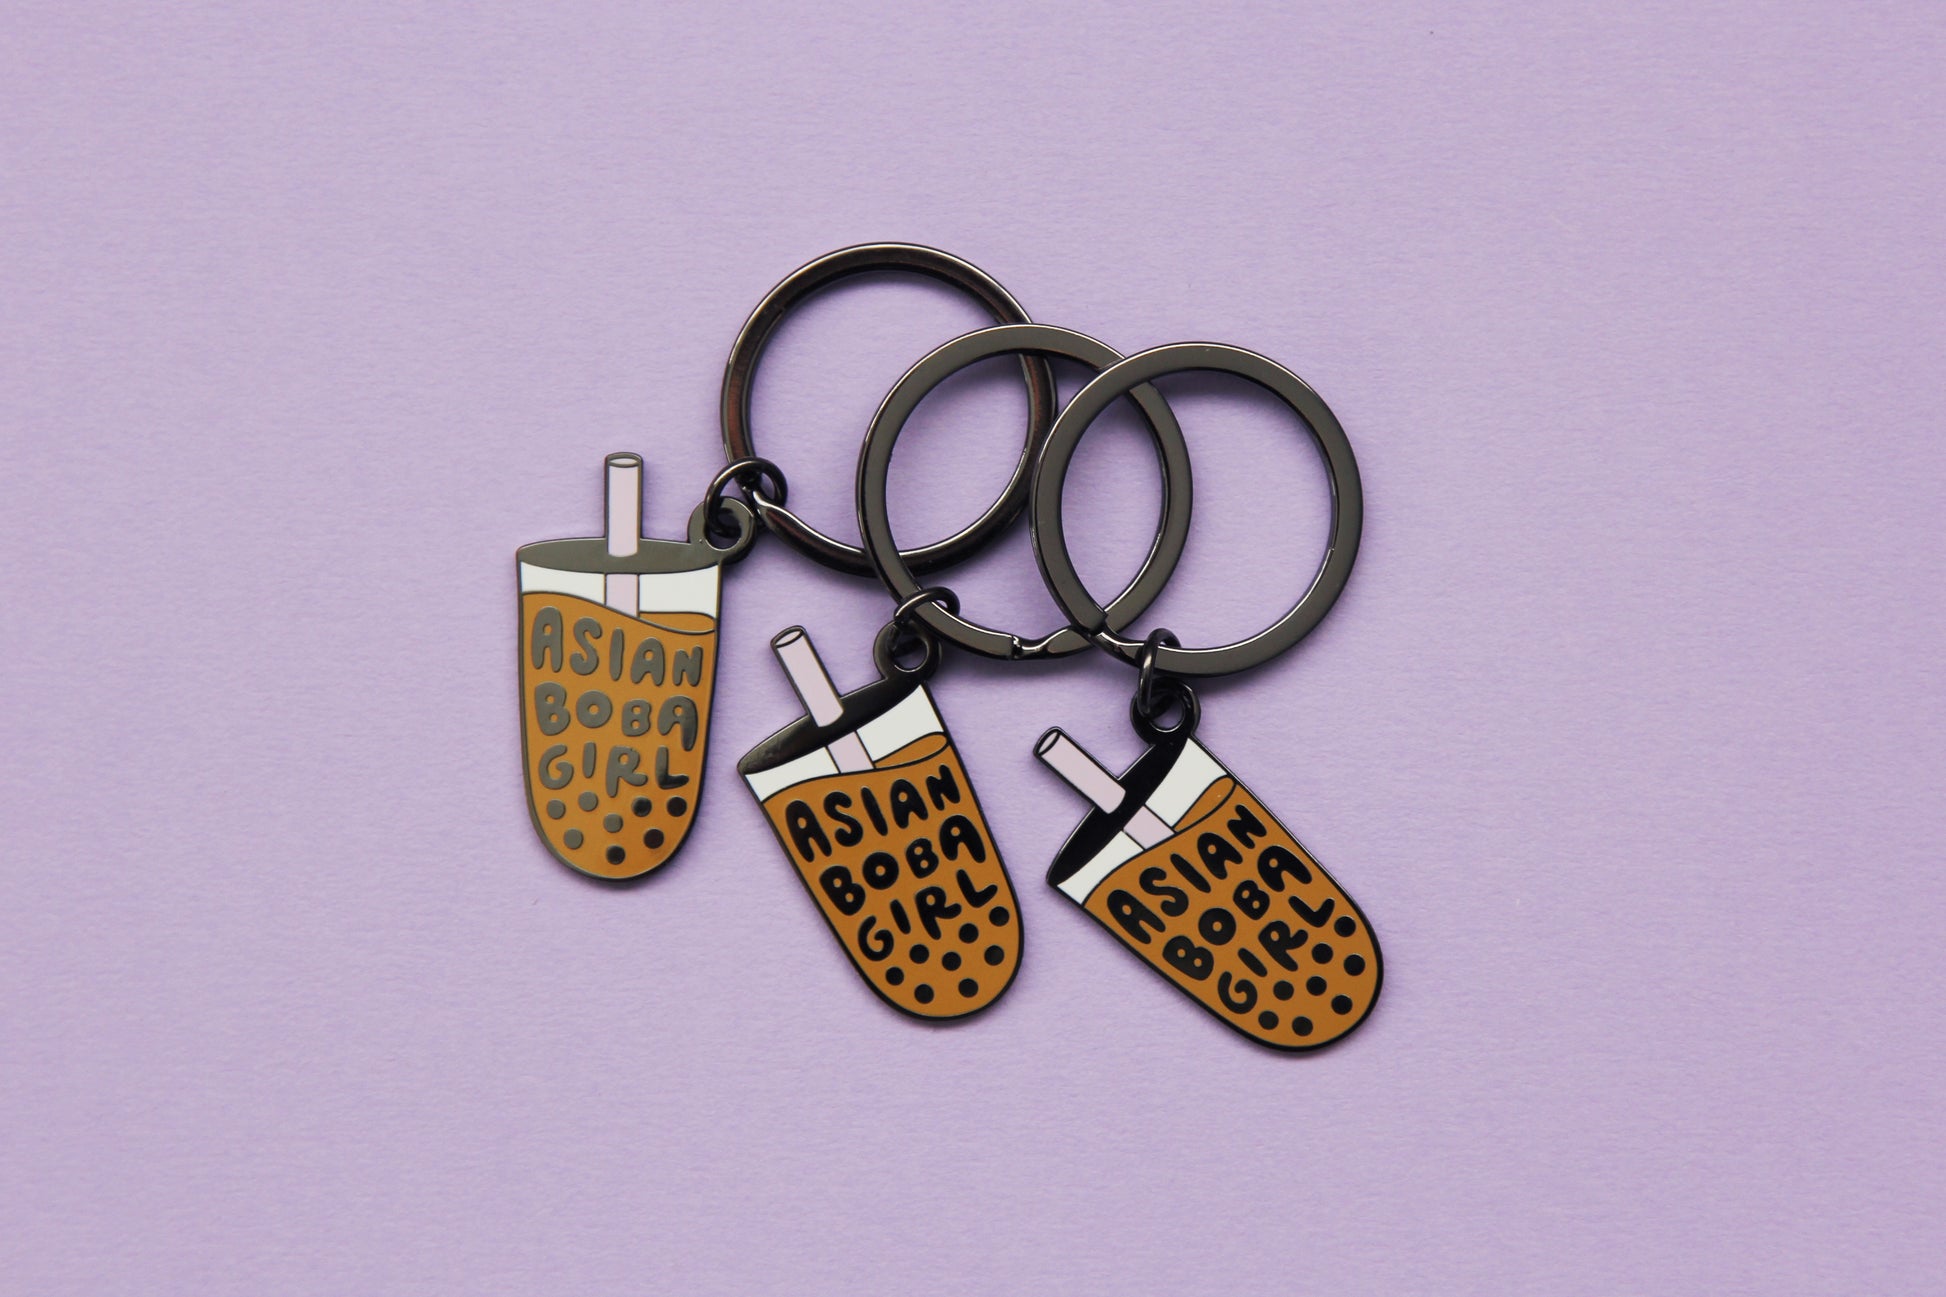 3 enamel keychains showing a cup of boba that says "Asian Boba Girl" with a purple straw over a purple background.